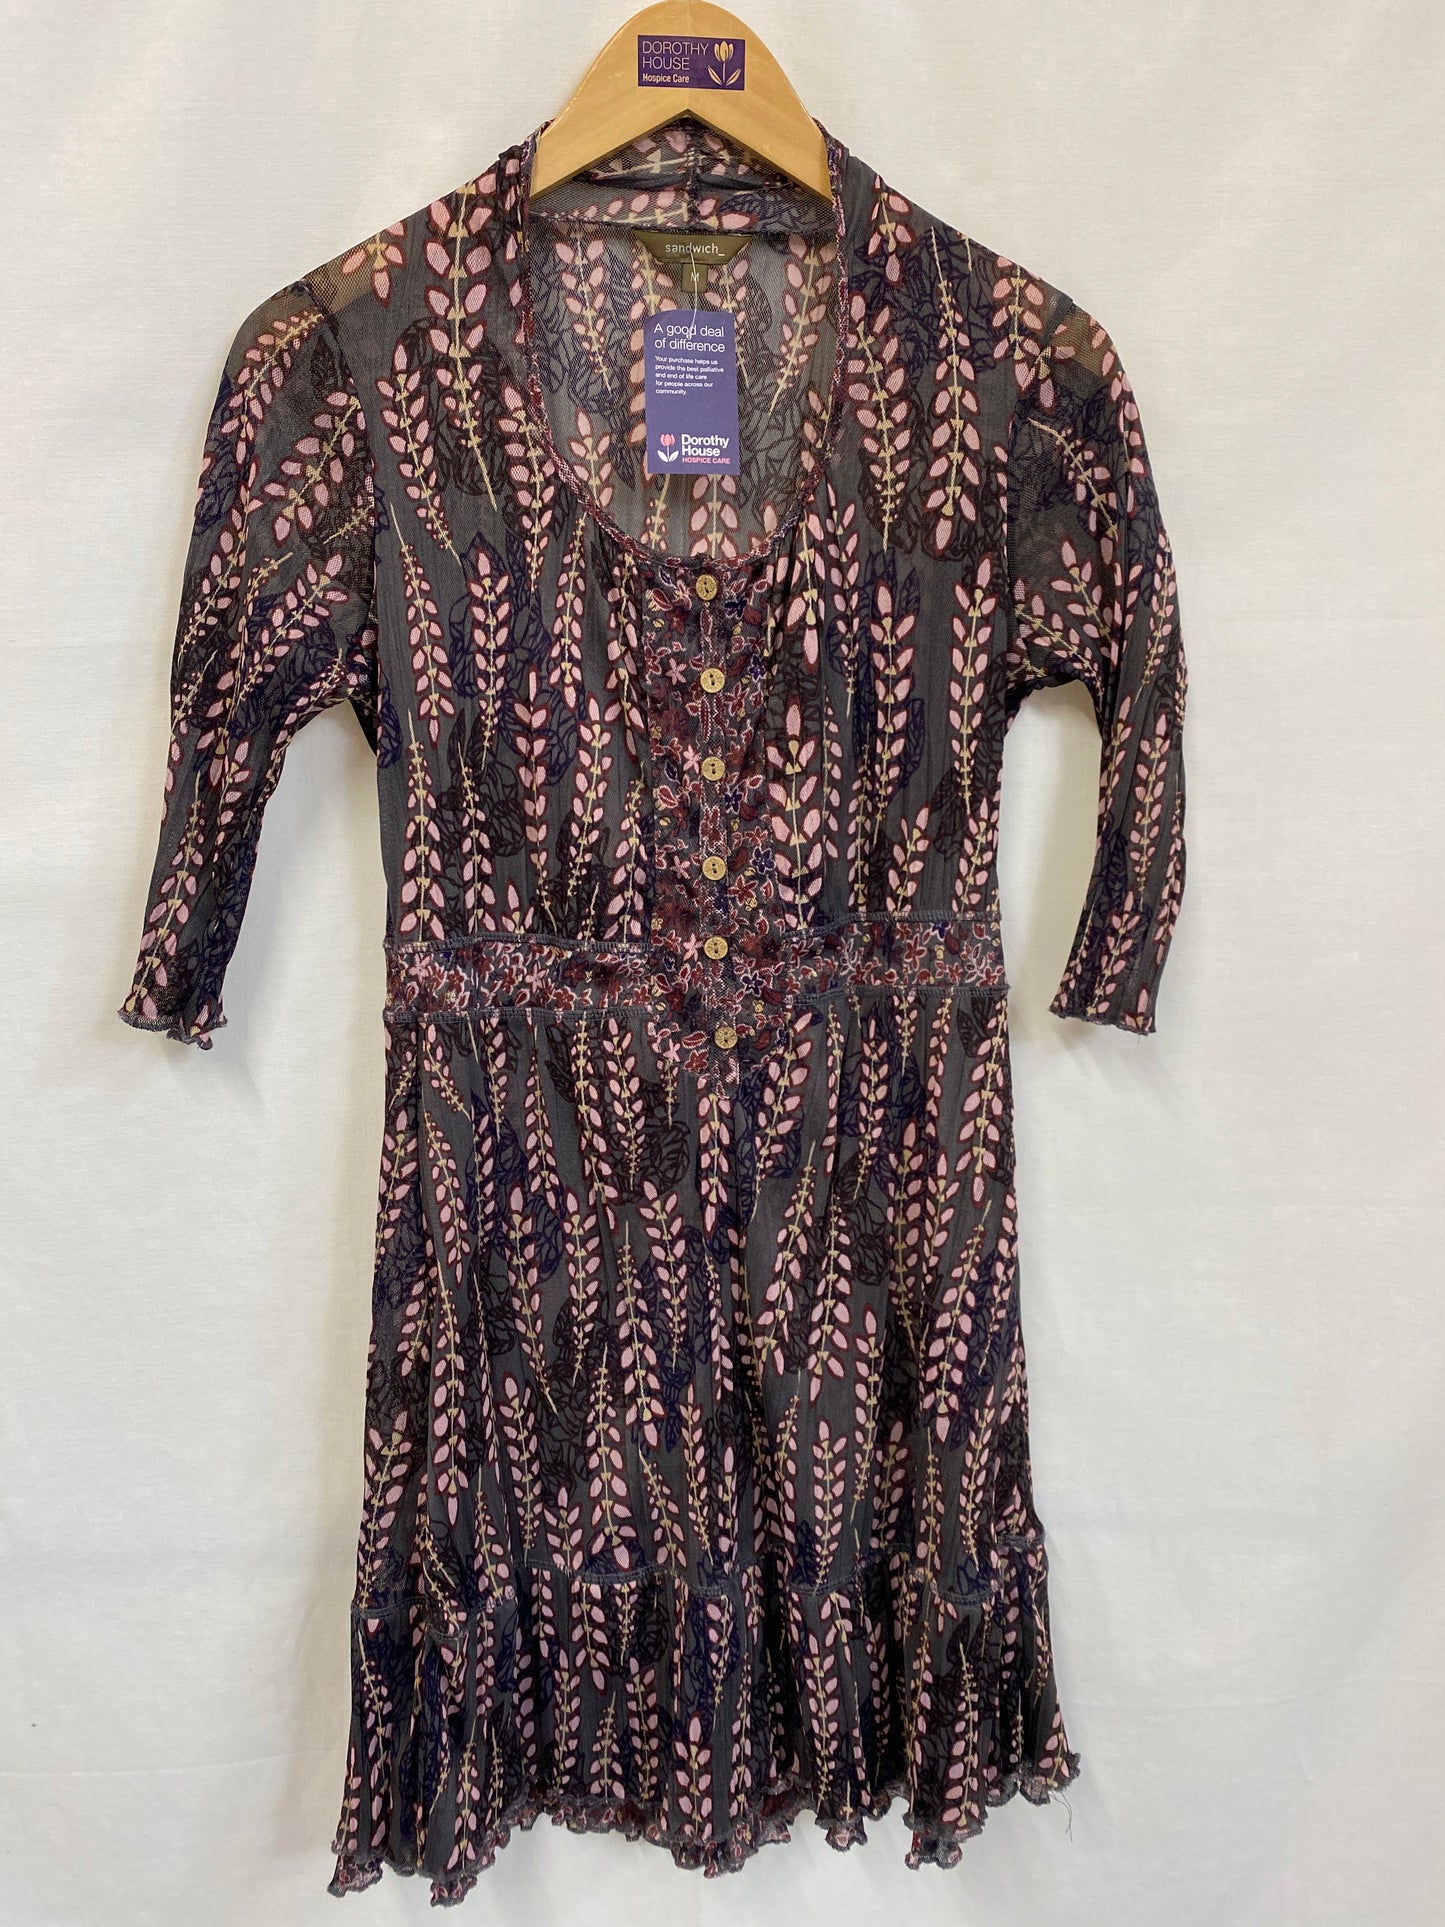 Sheer Mesh Button Front Grey | Pink Floral Dress Size M